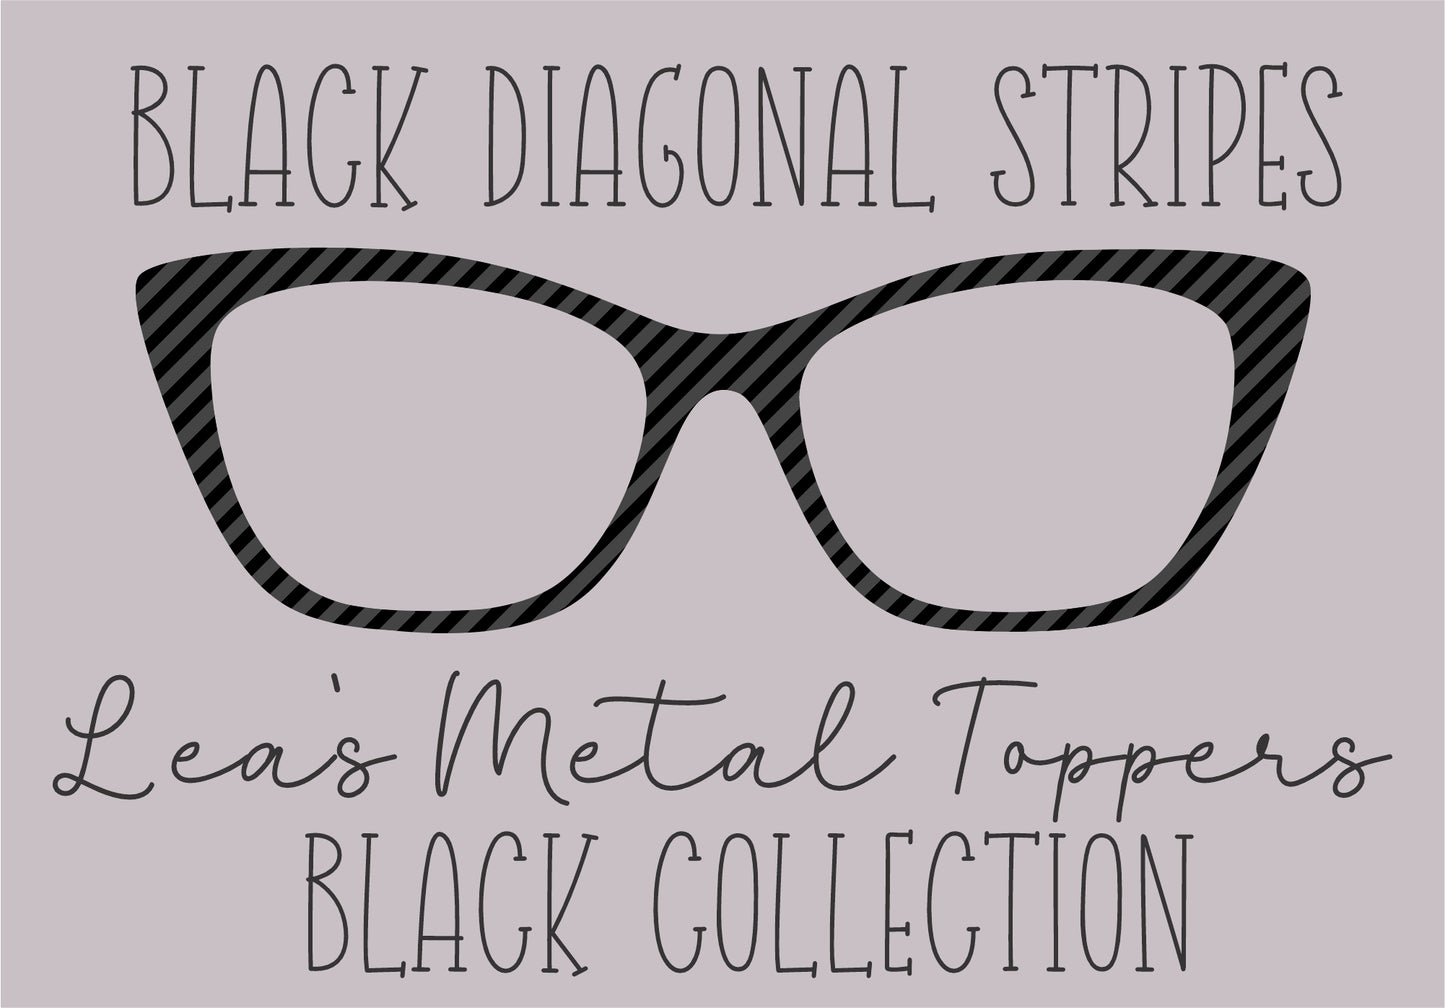 BLACK DIAGONAL STRIPES 1 Eyewear Frame Toppers COMES WITH MAGNETS